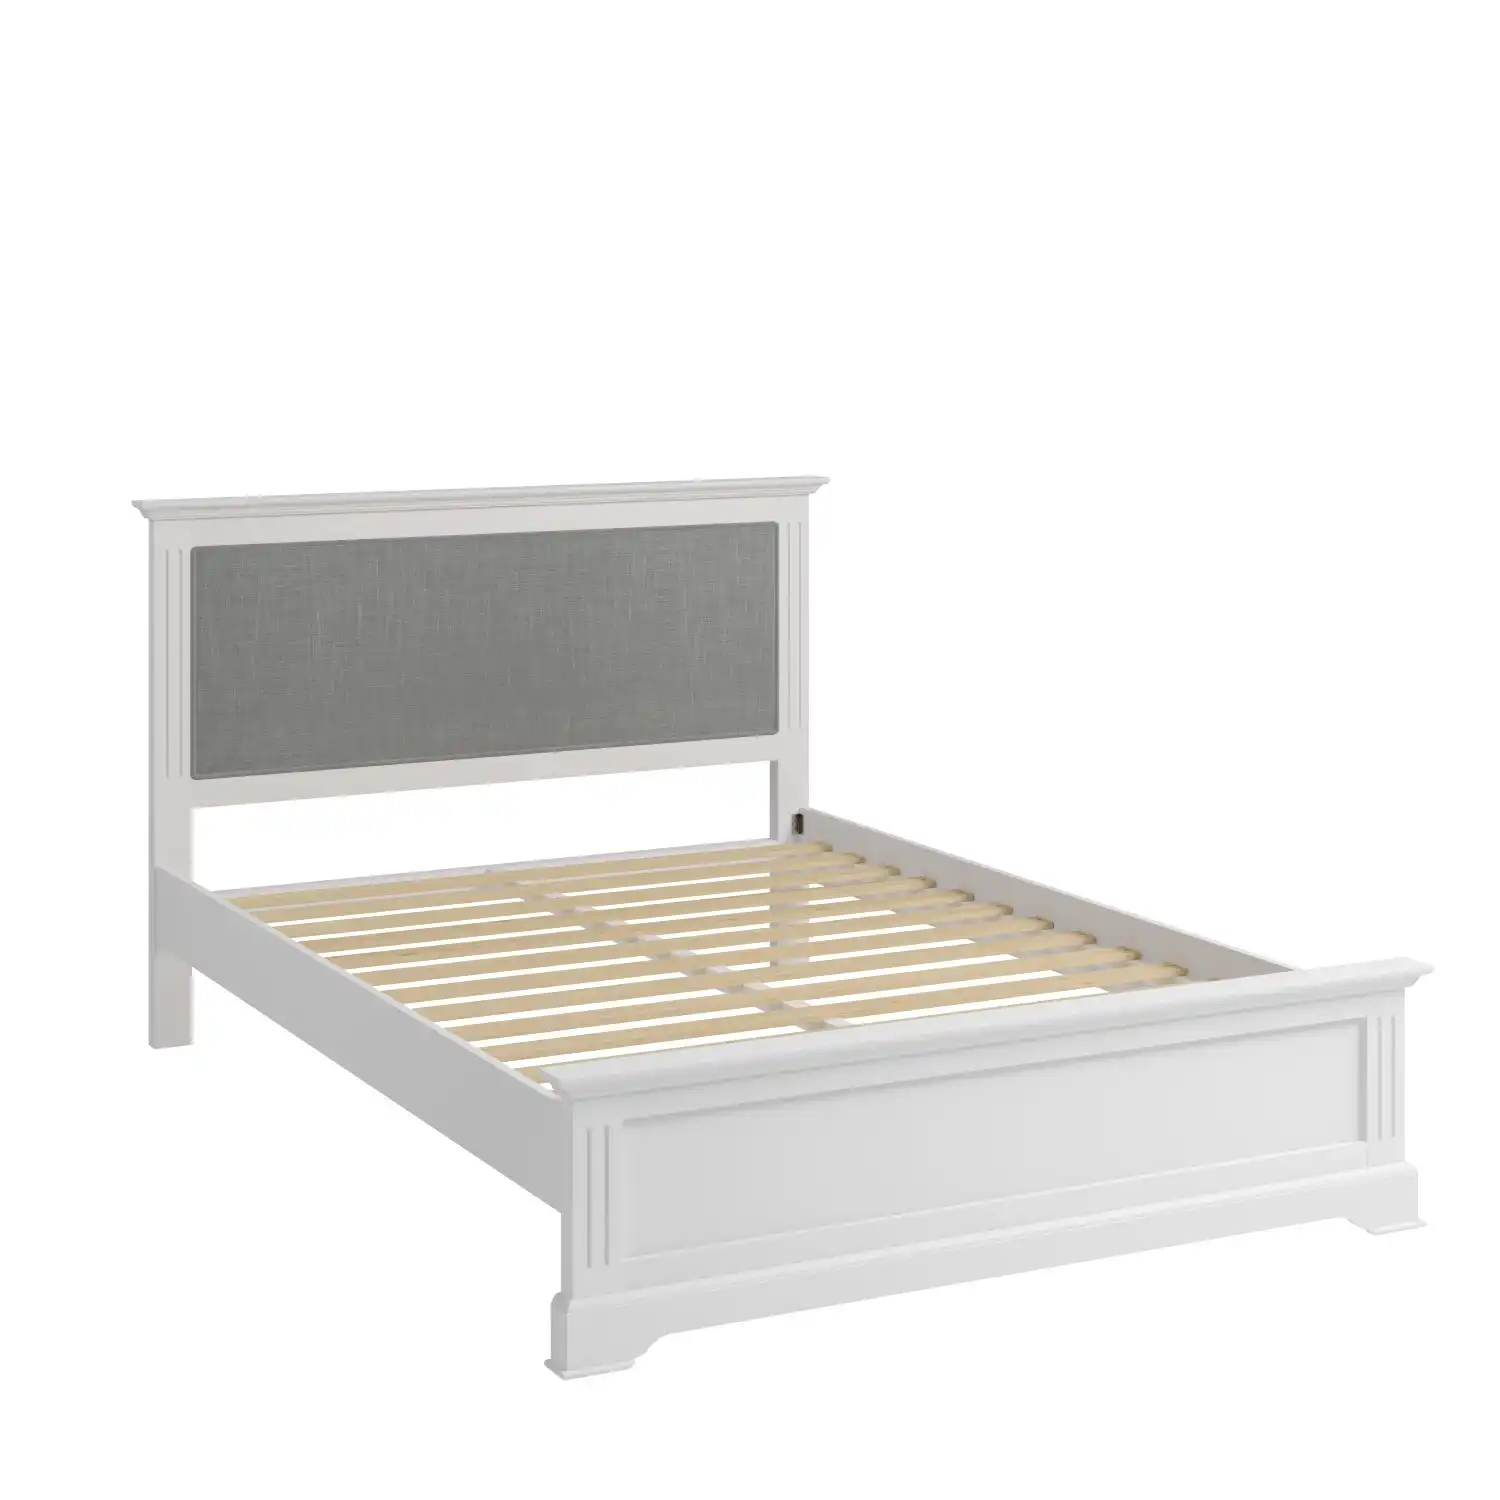 White Painted Wood 5ft King Size Bed